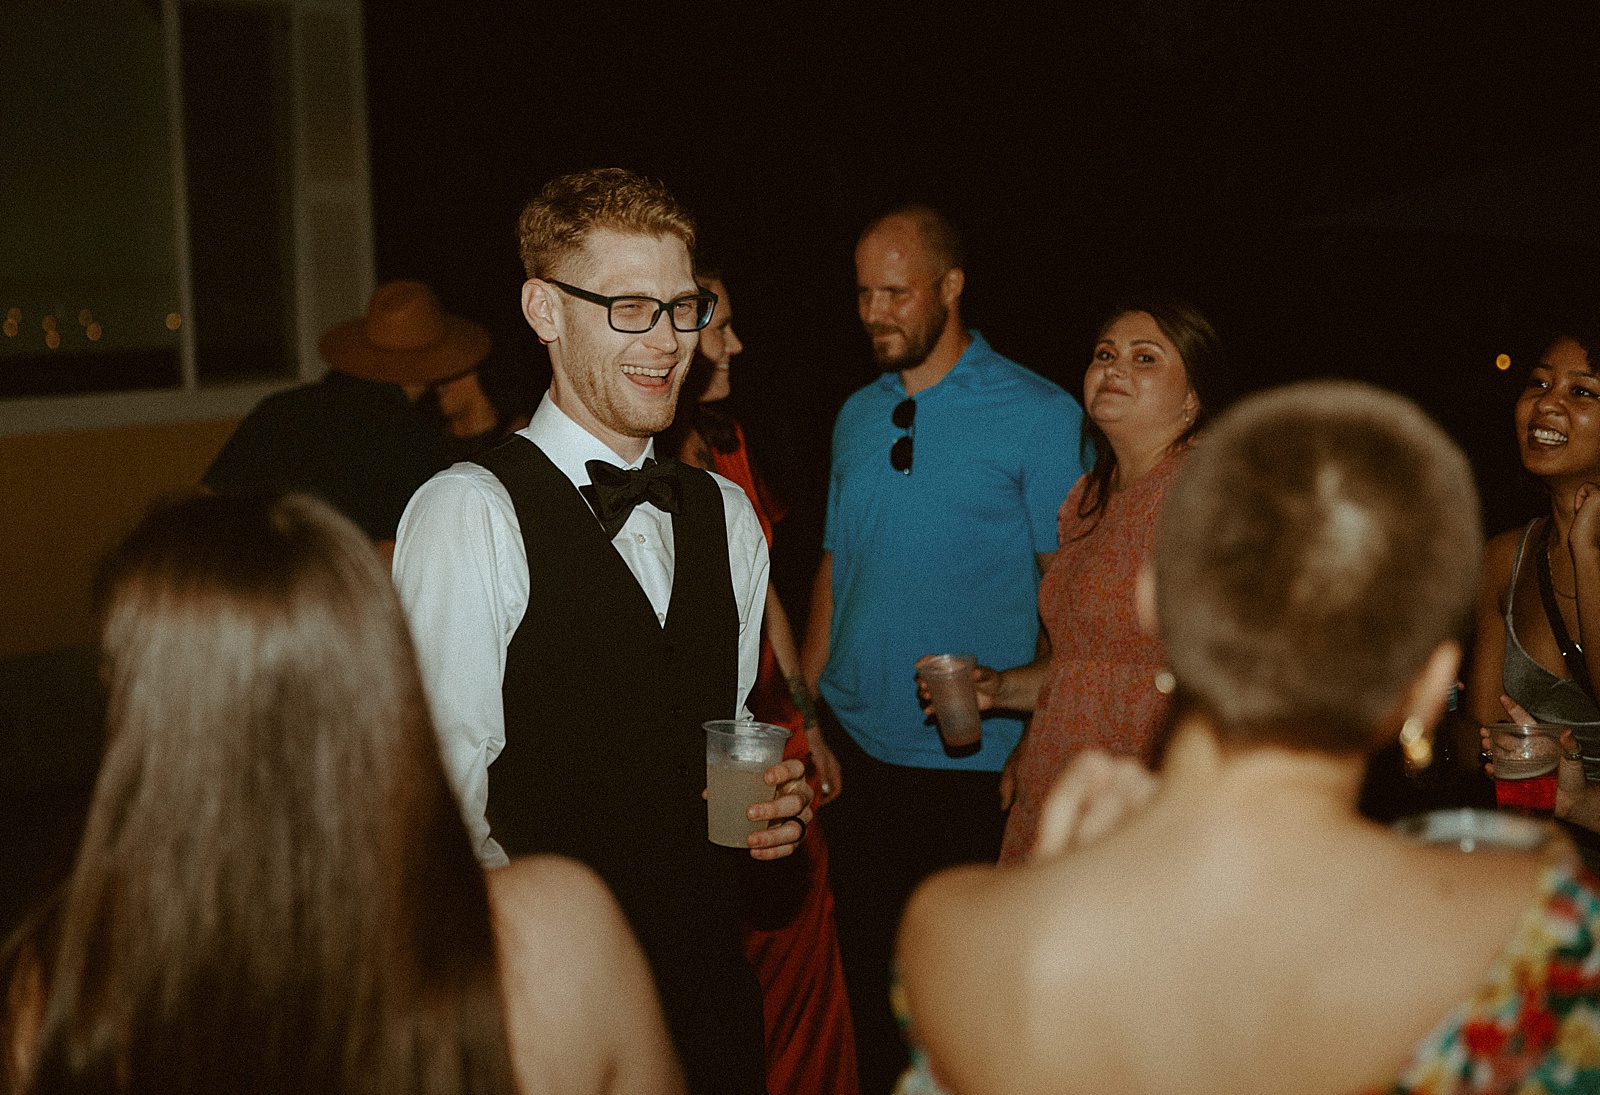 guests dancing at Oregon wedding captured by Danielle Johnson Photography